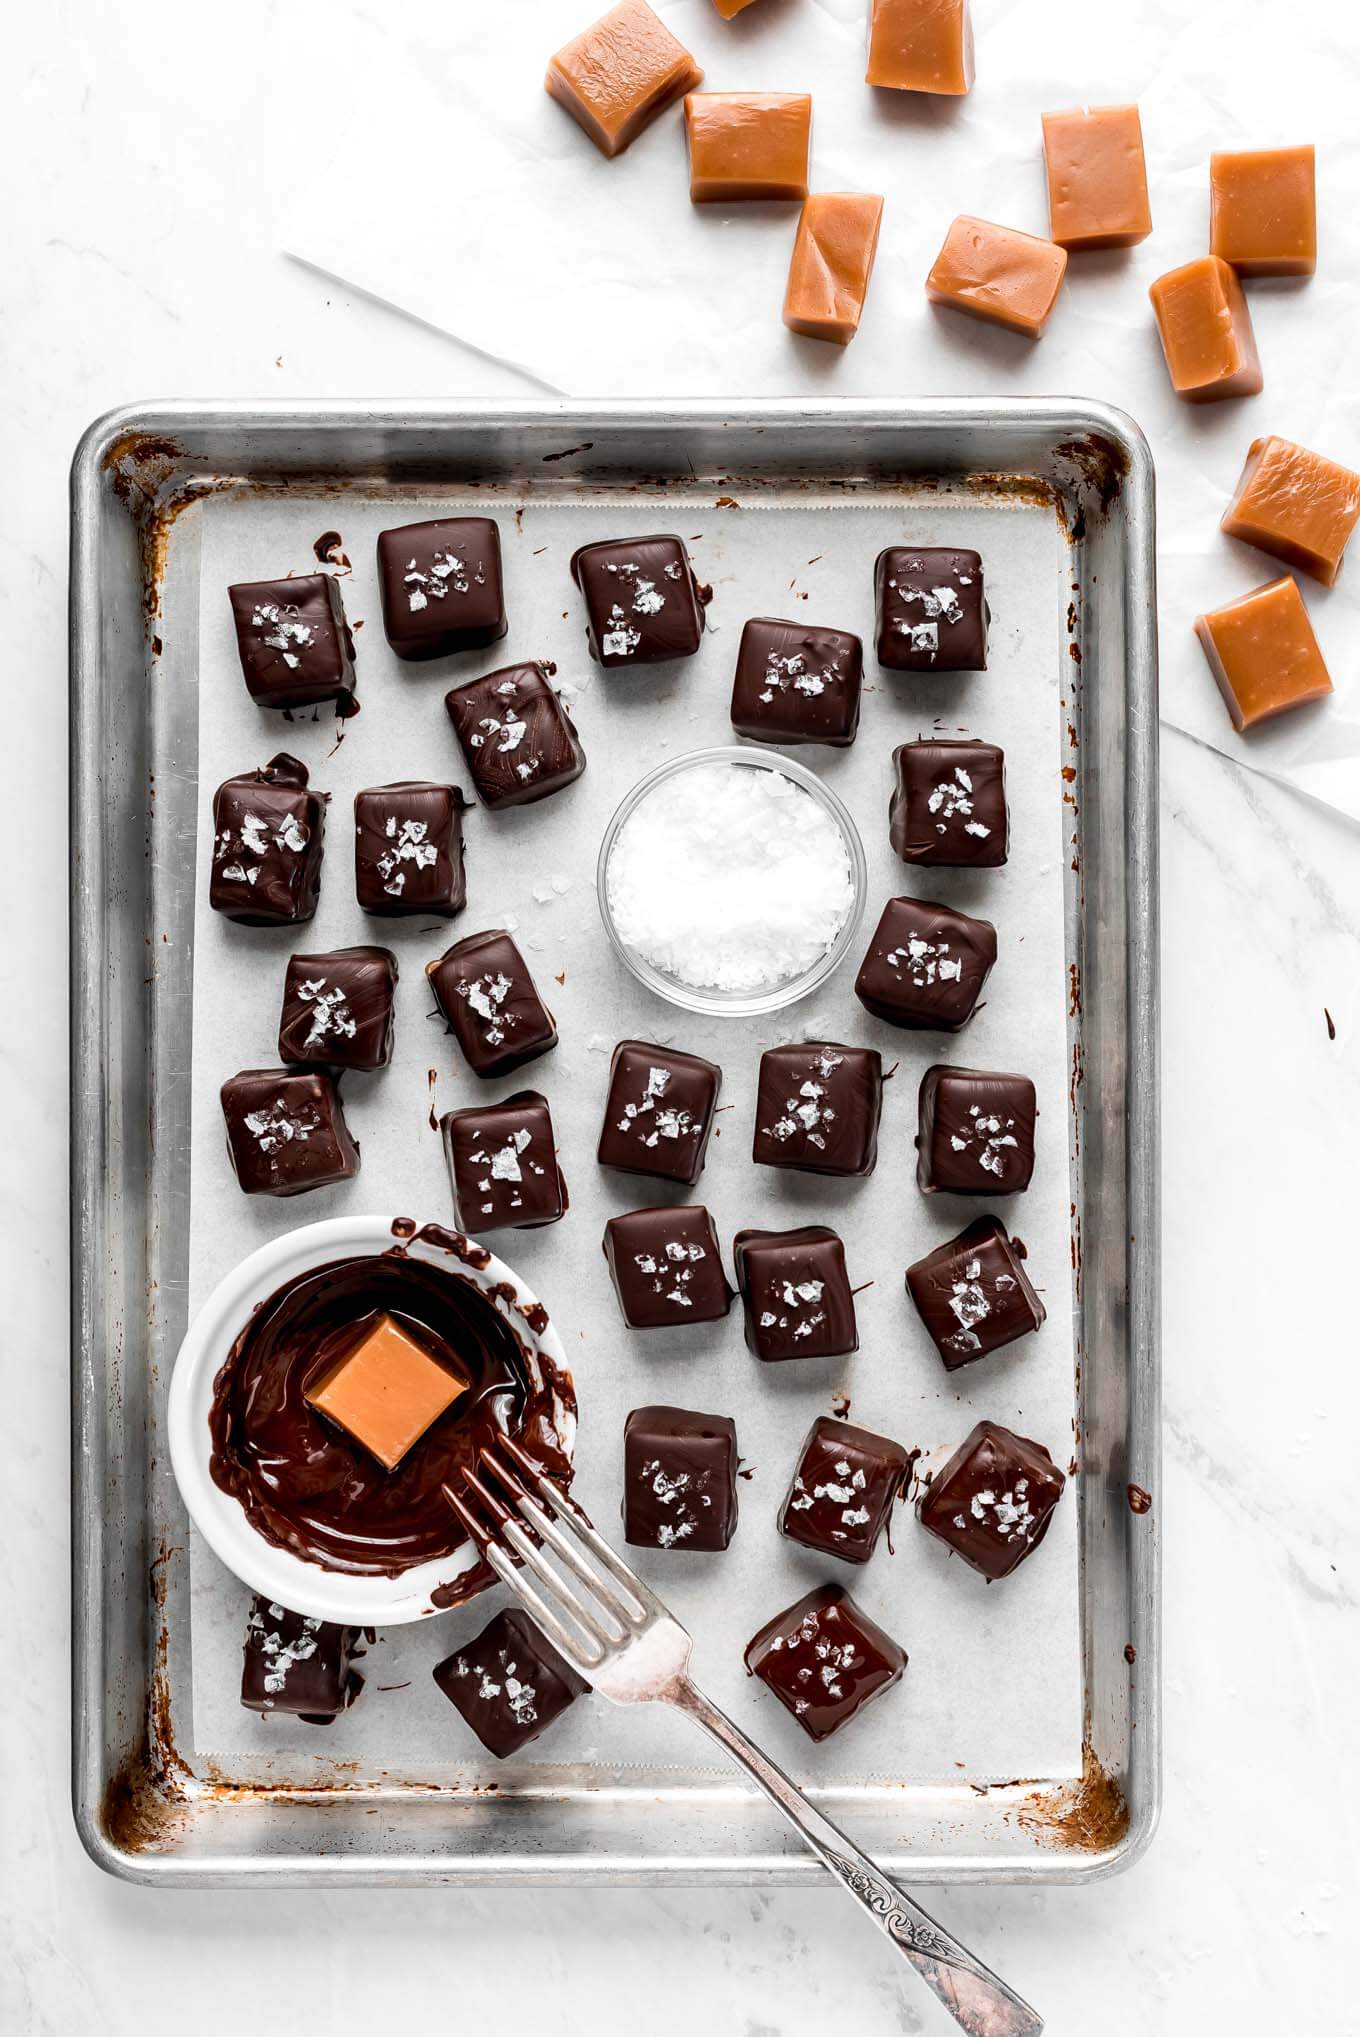 A baking sheet full of chocolate covered caramels, a dish of melted chocolate, and a small bowl of sea salt.